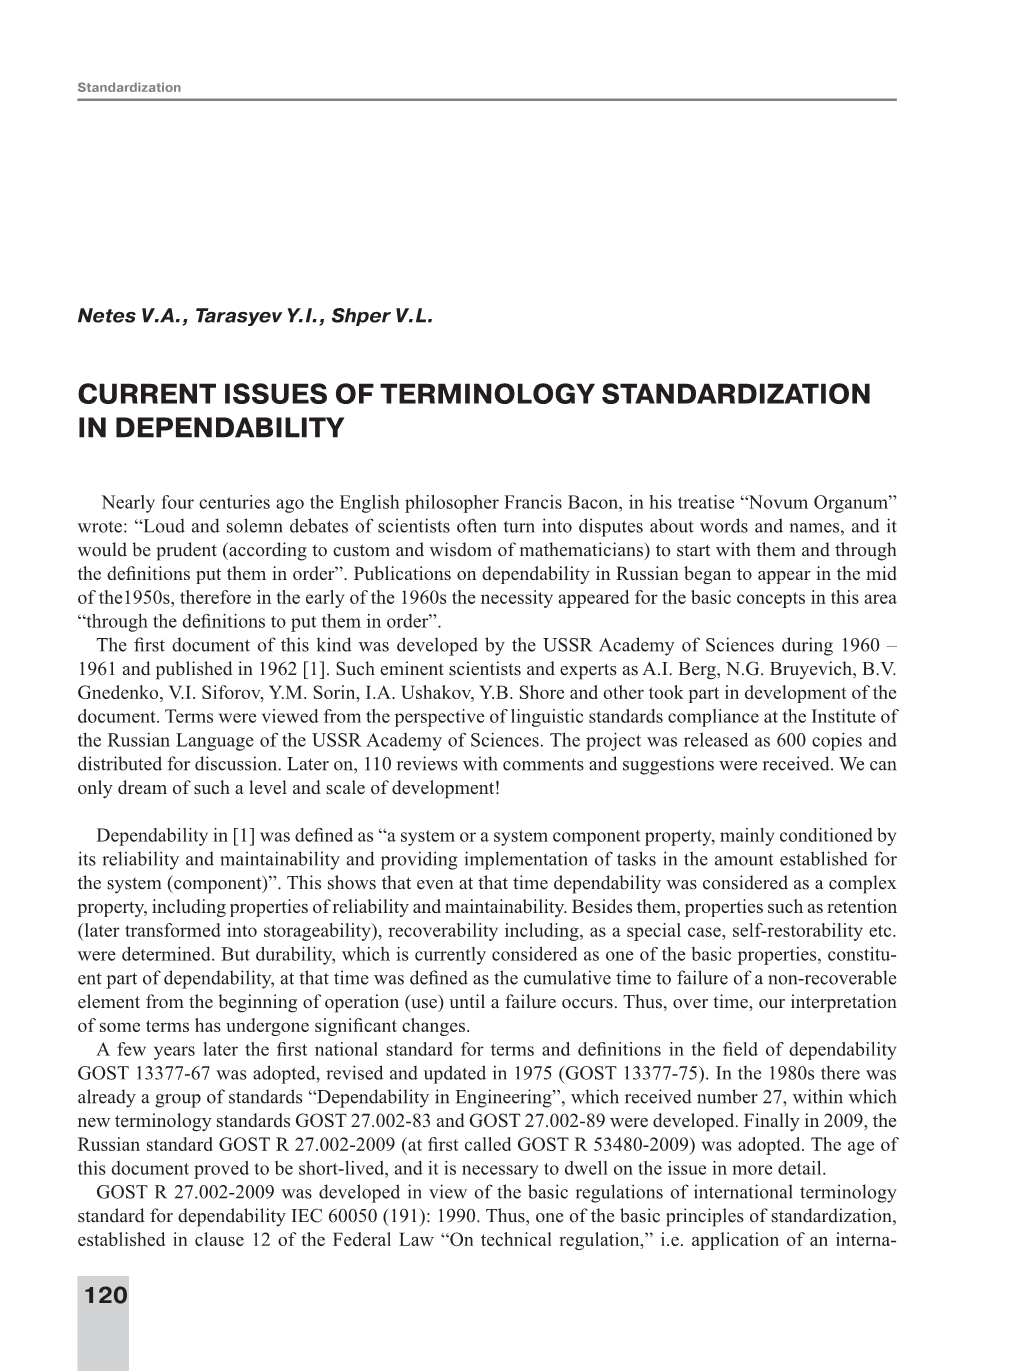 Current Issues of Terminology Standardization in Dependability